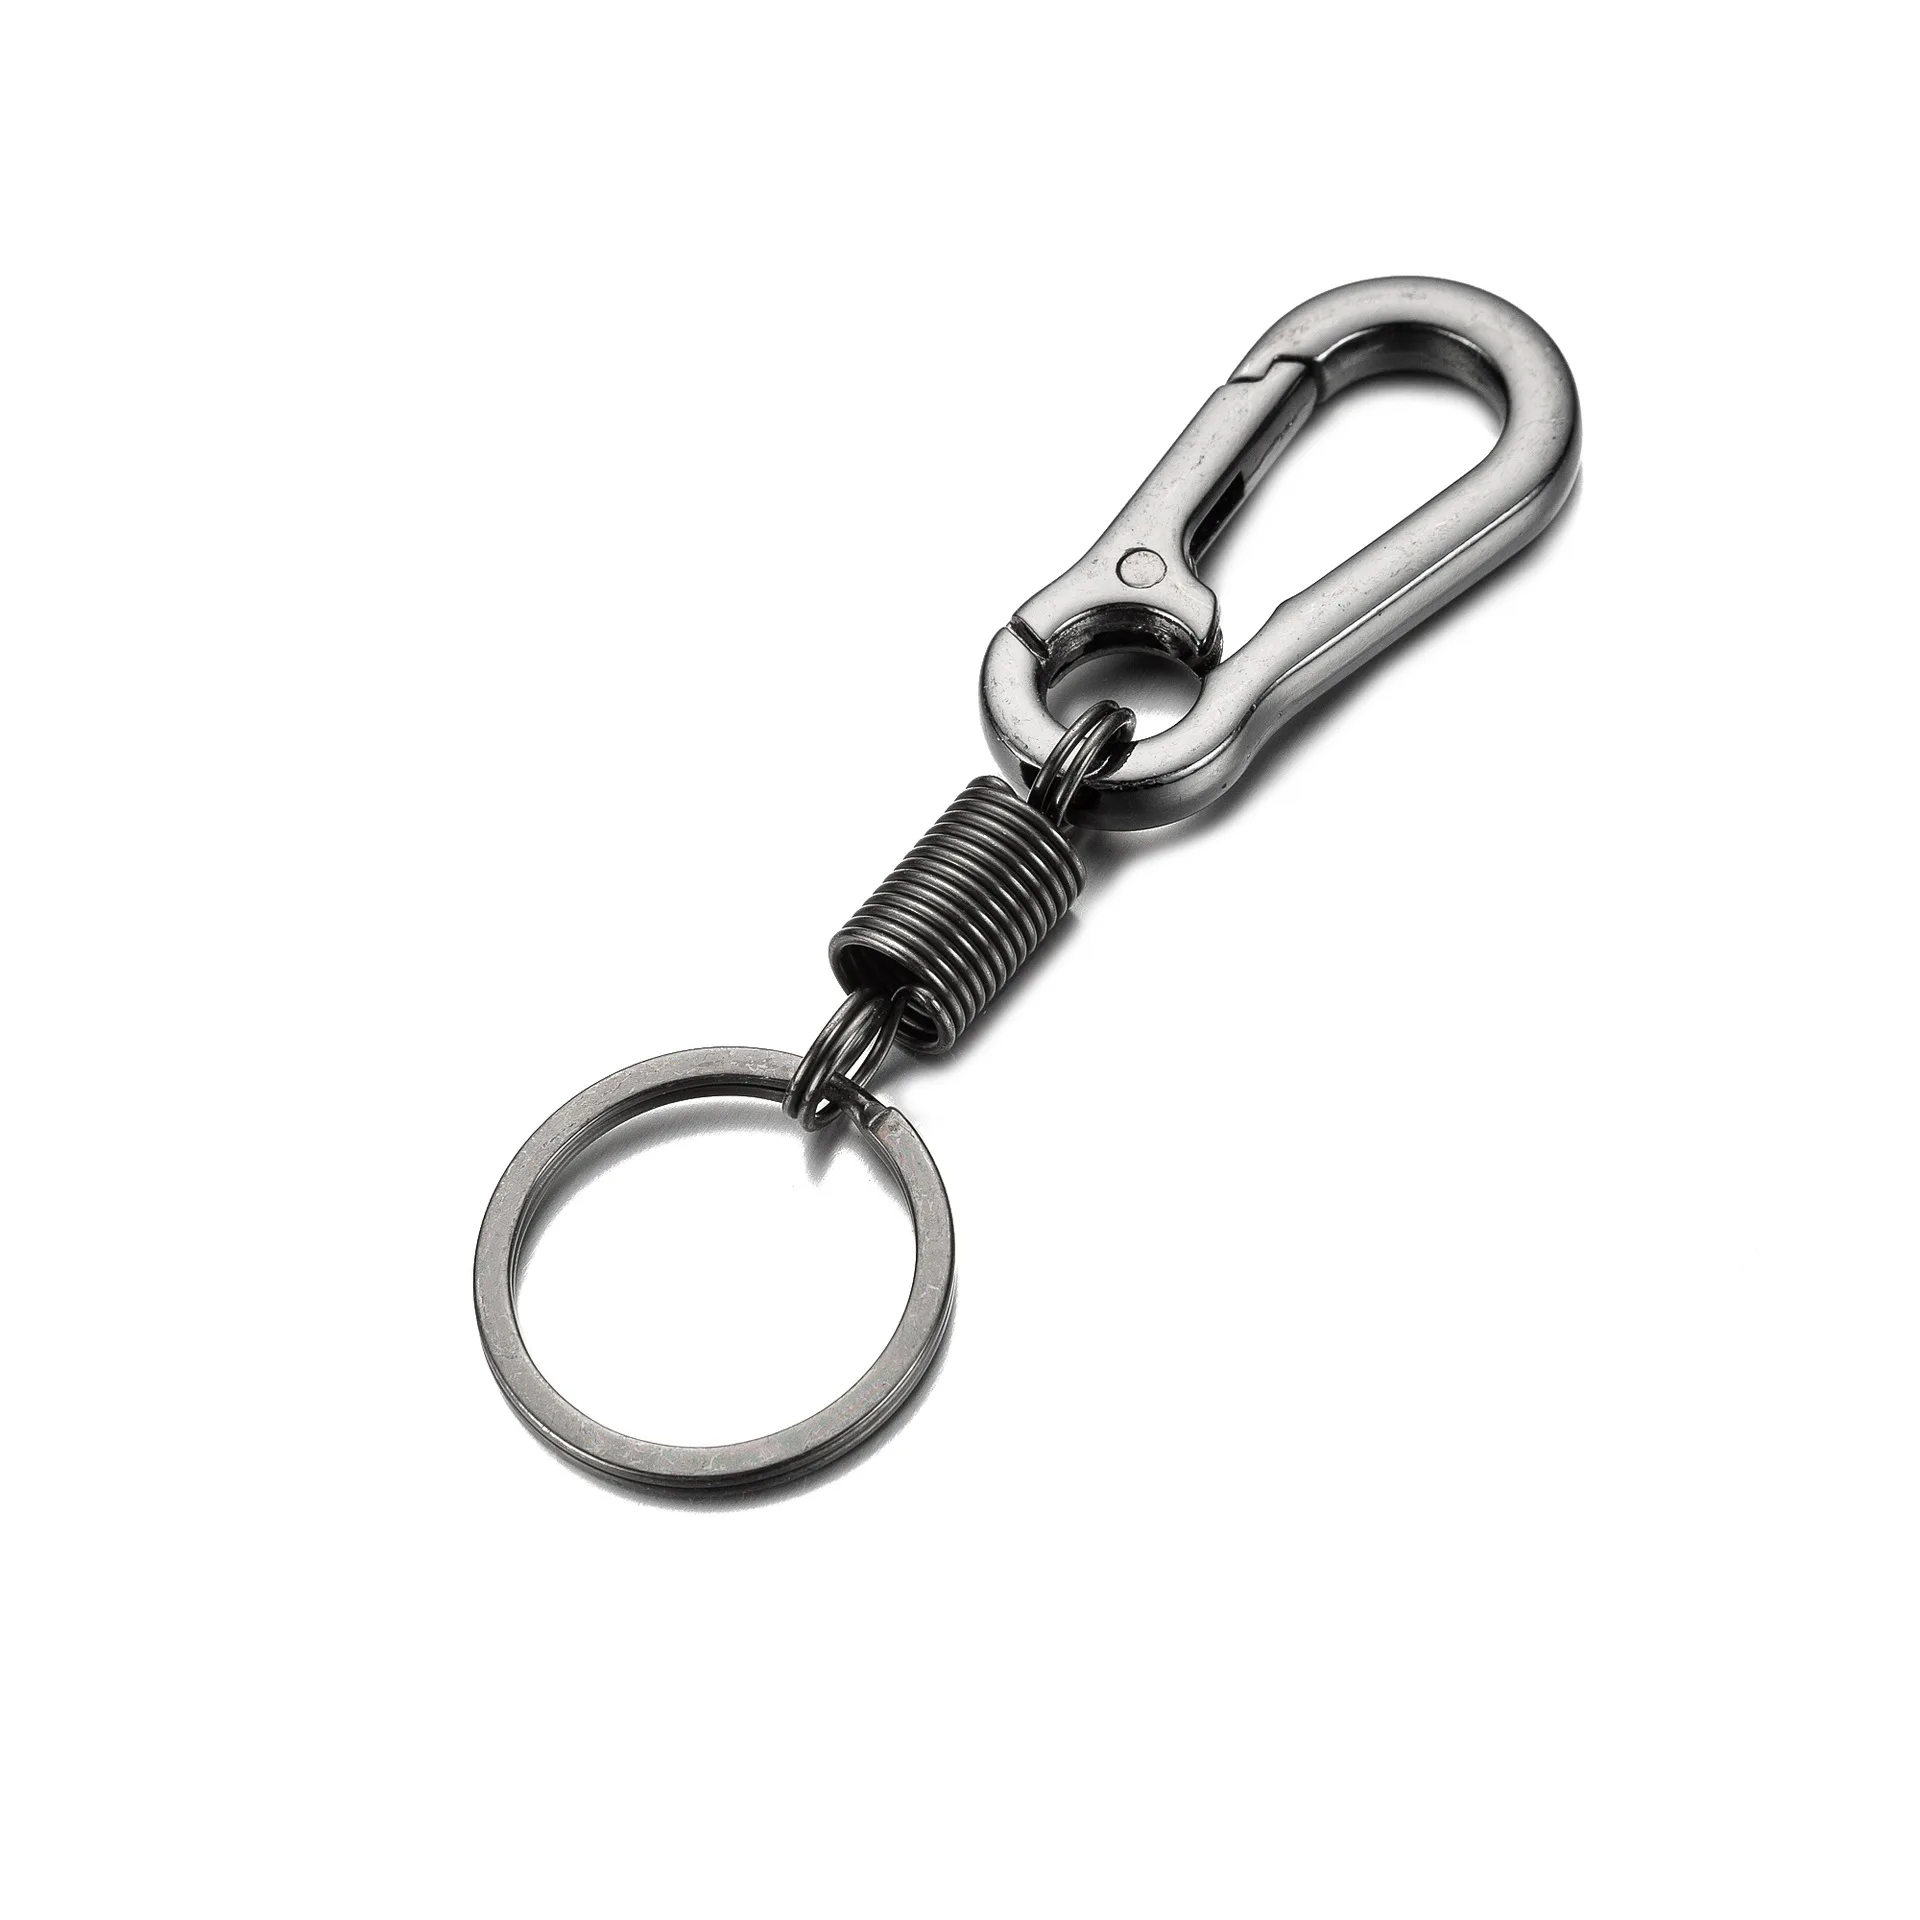 Sporting Ablack Stainless Steel Spring Key Chain Gourd Buckle Carabiner Keychain - £24.04 GBP